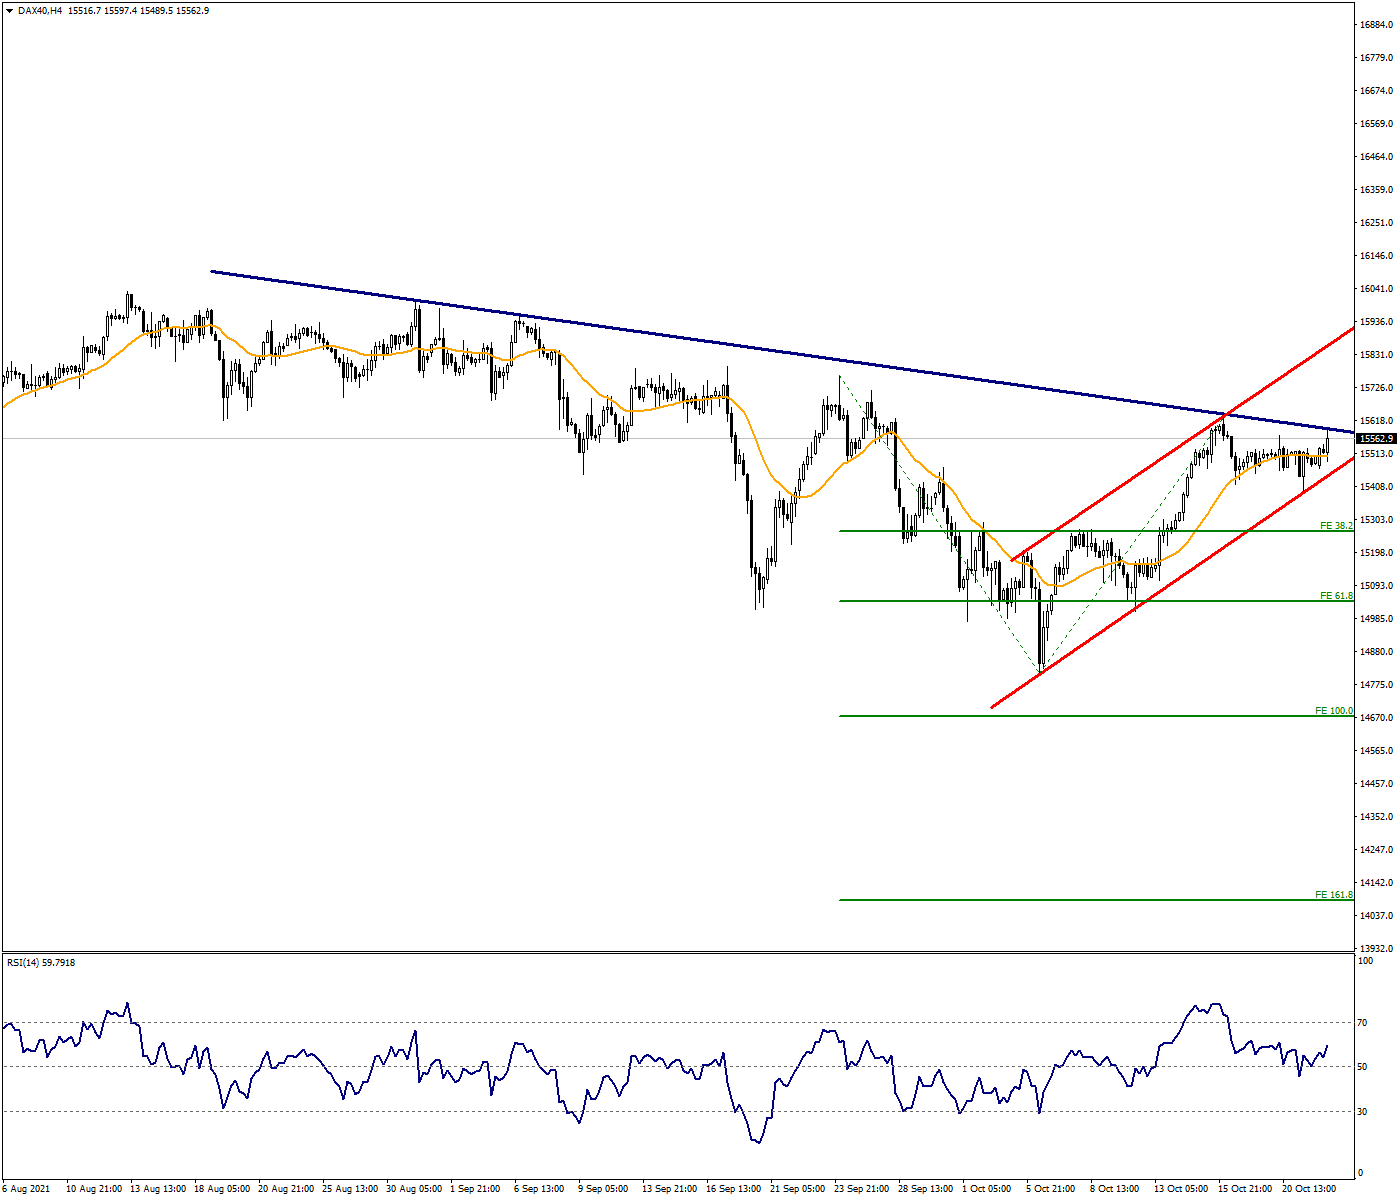 DAX40 continues to decline